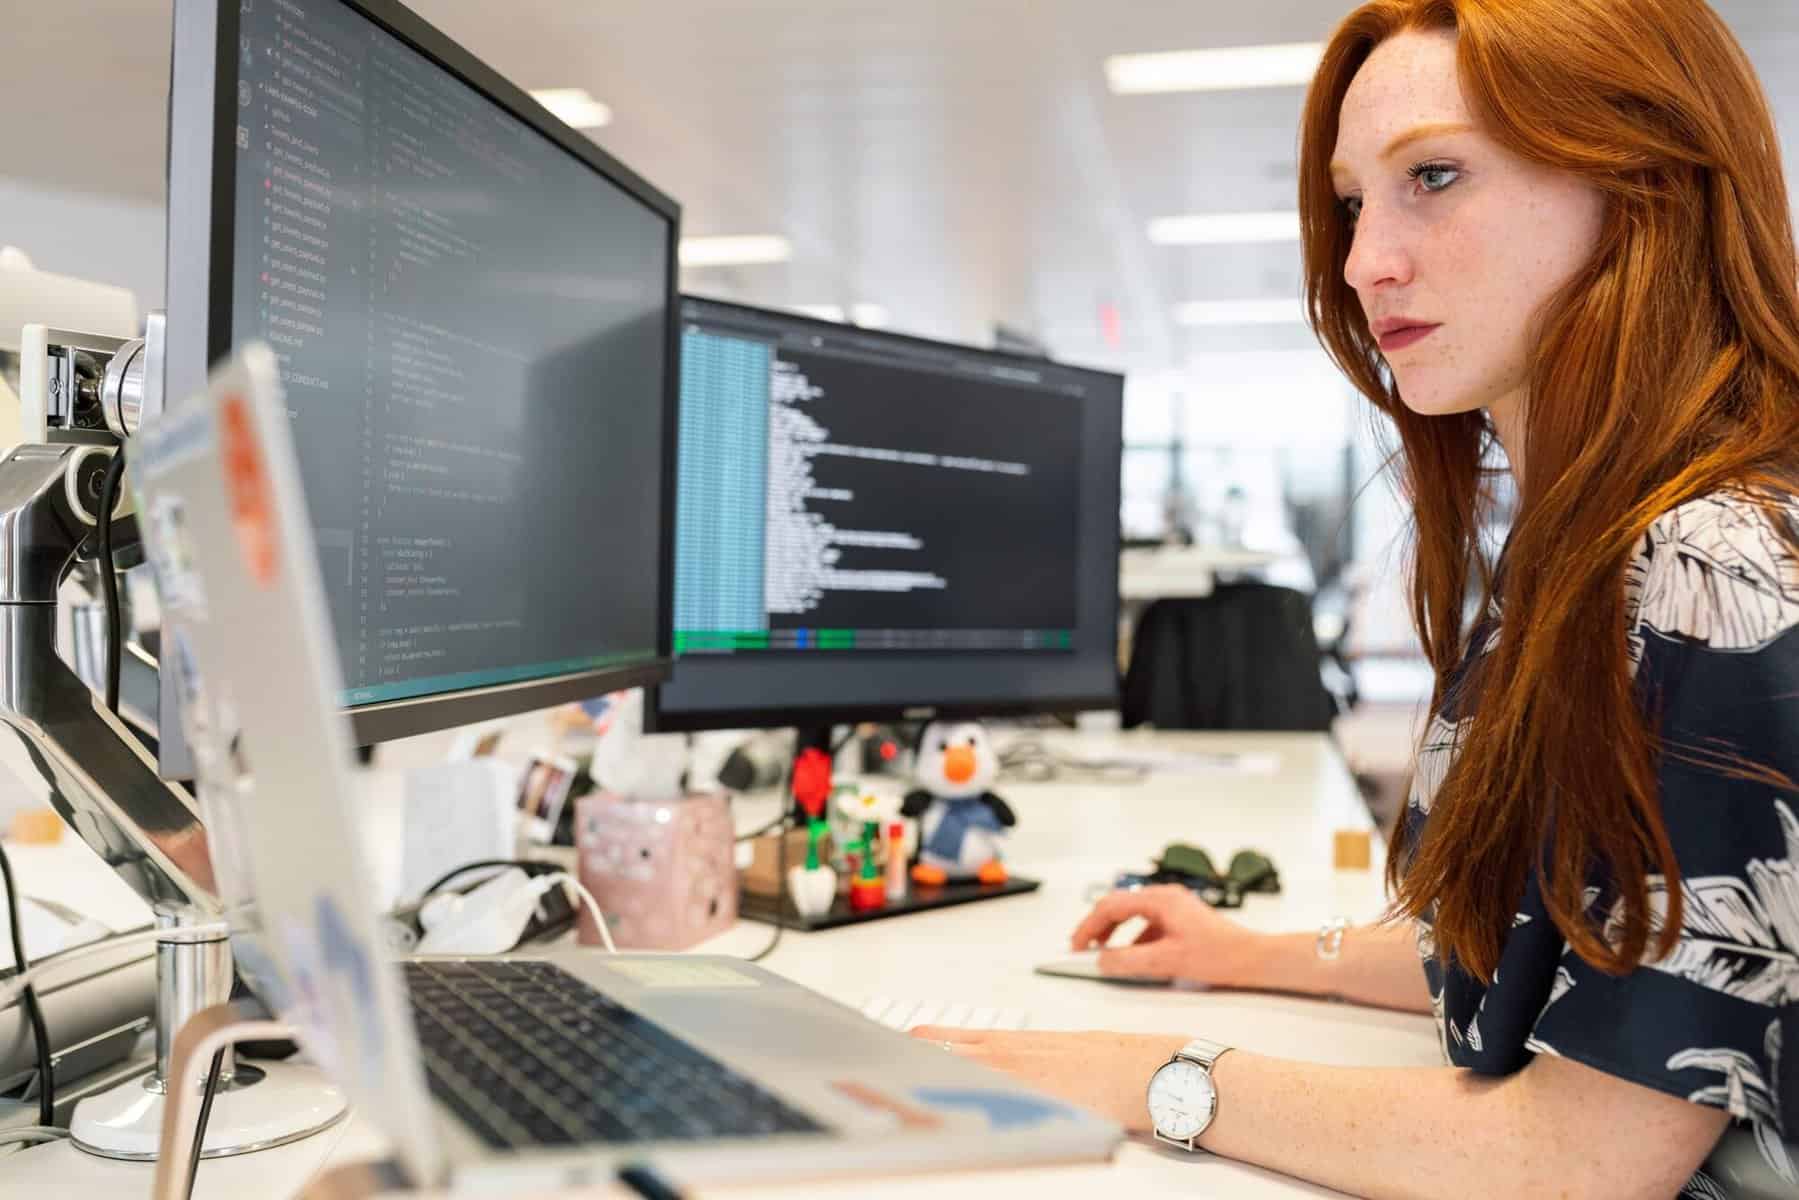 A young woman codes while looking at two monitors and a laptop